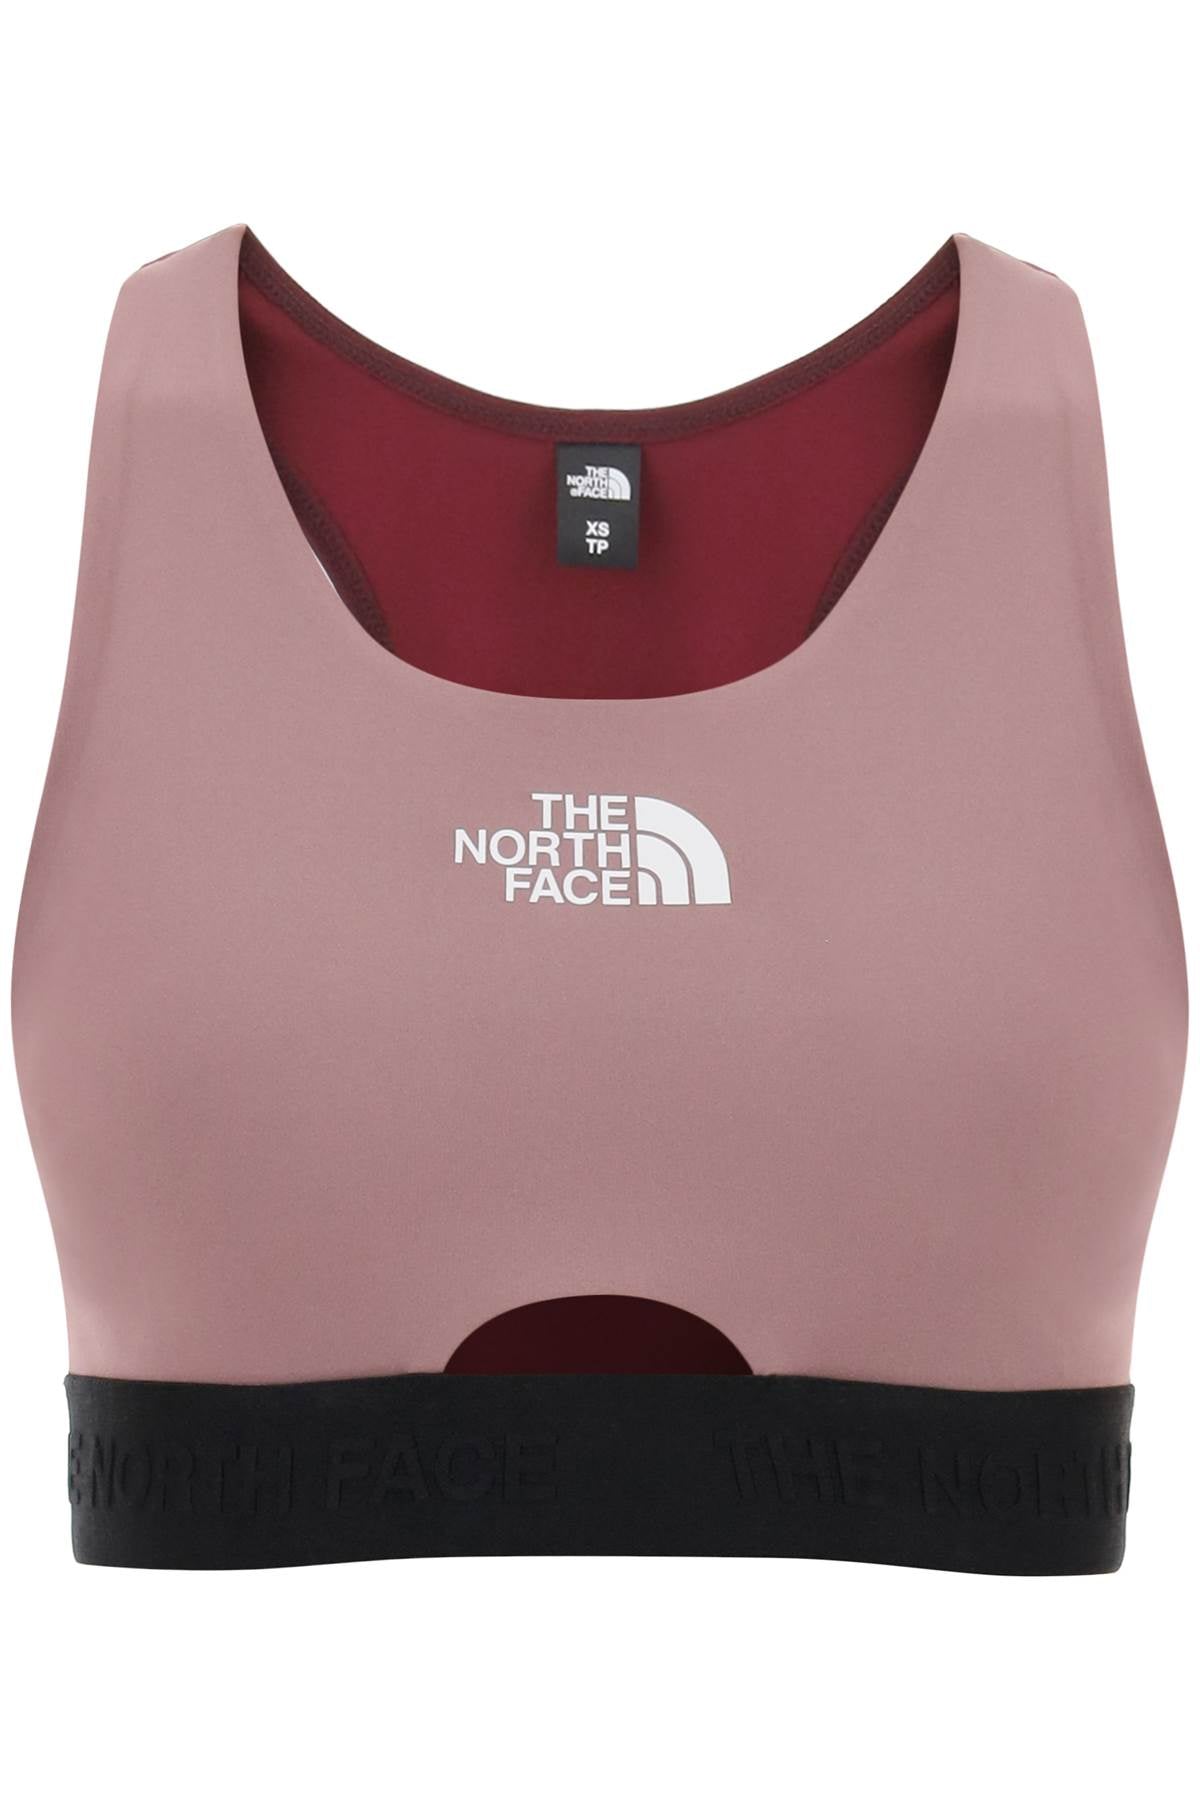 The north face mountain athletics sports top-0